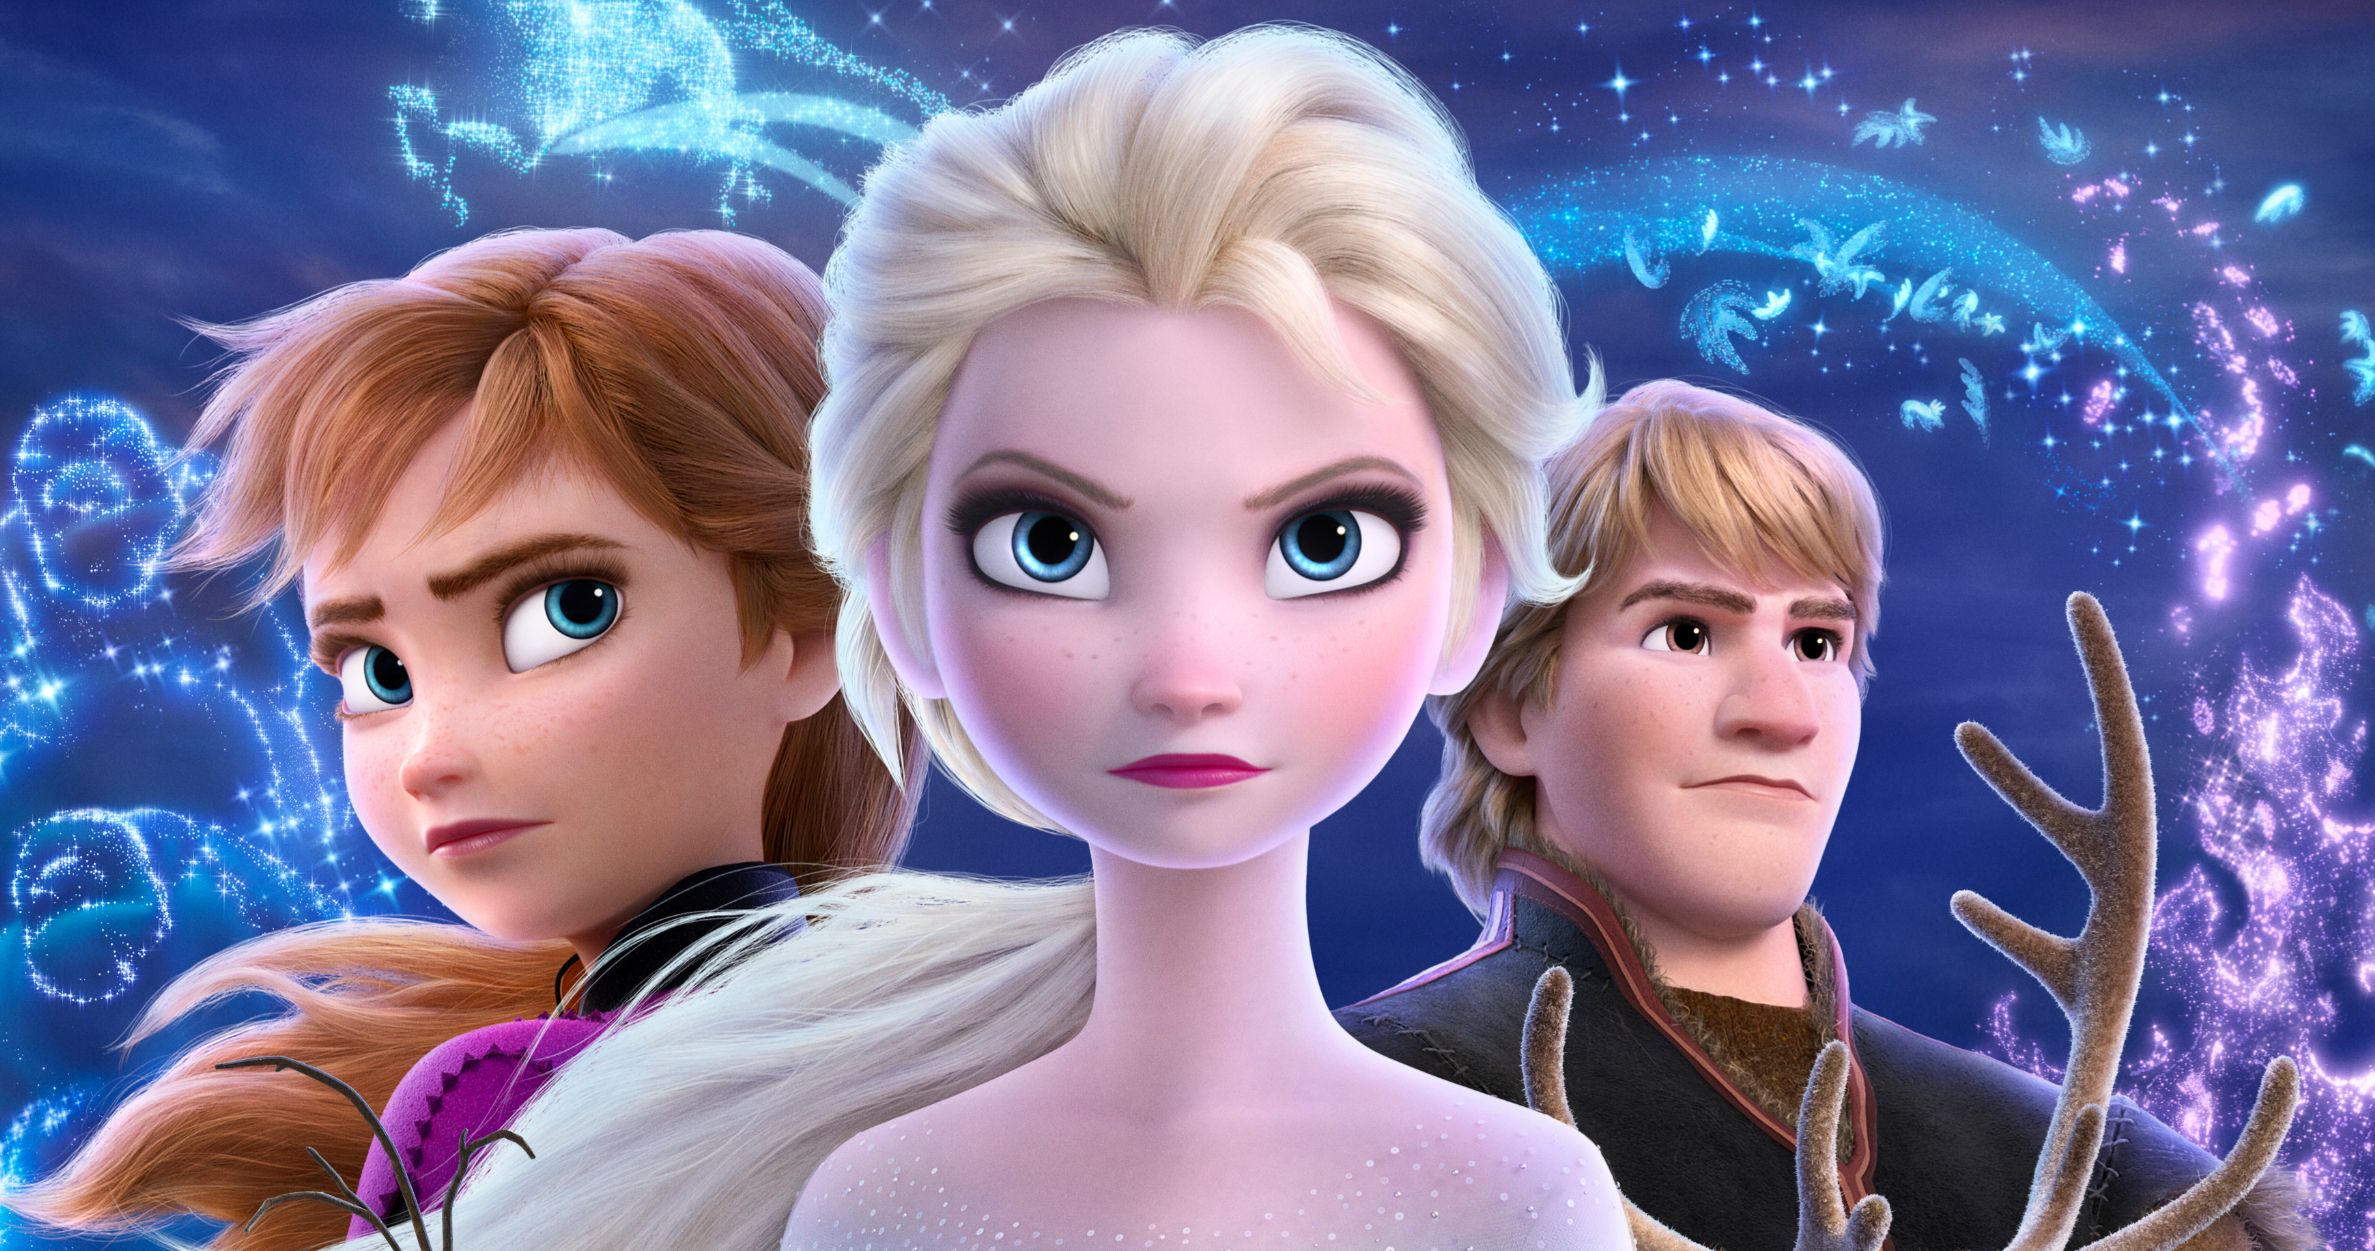 Frozen 2 Goes 'Into the Unknown' with New Video and Soundtrack Preview